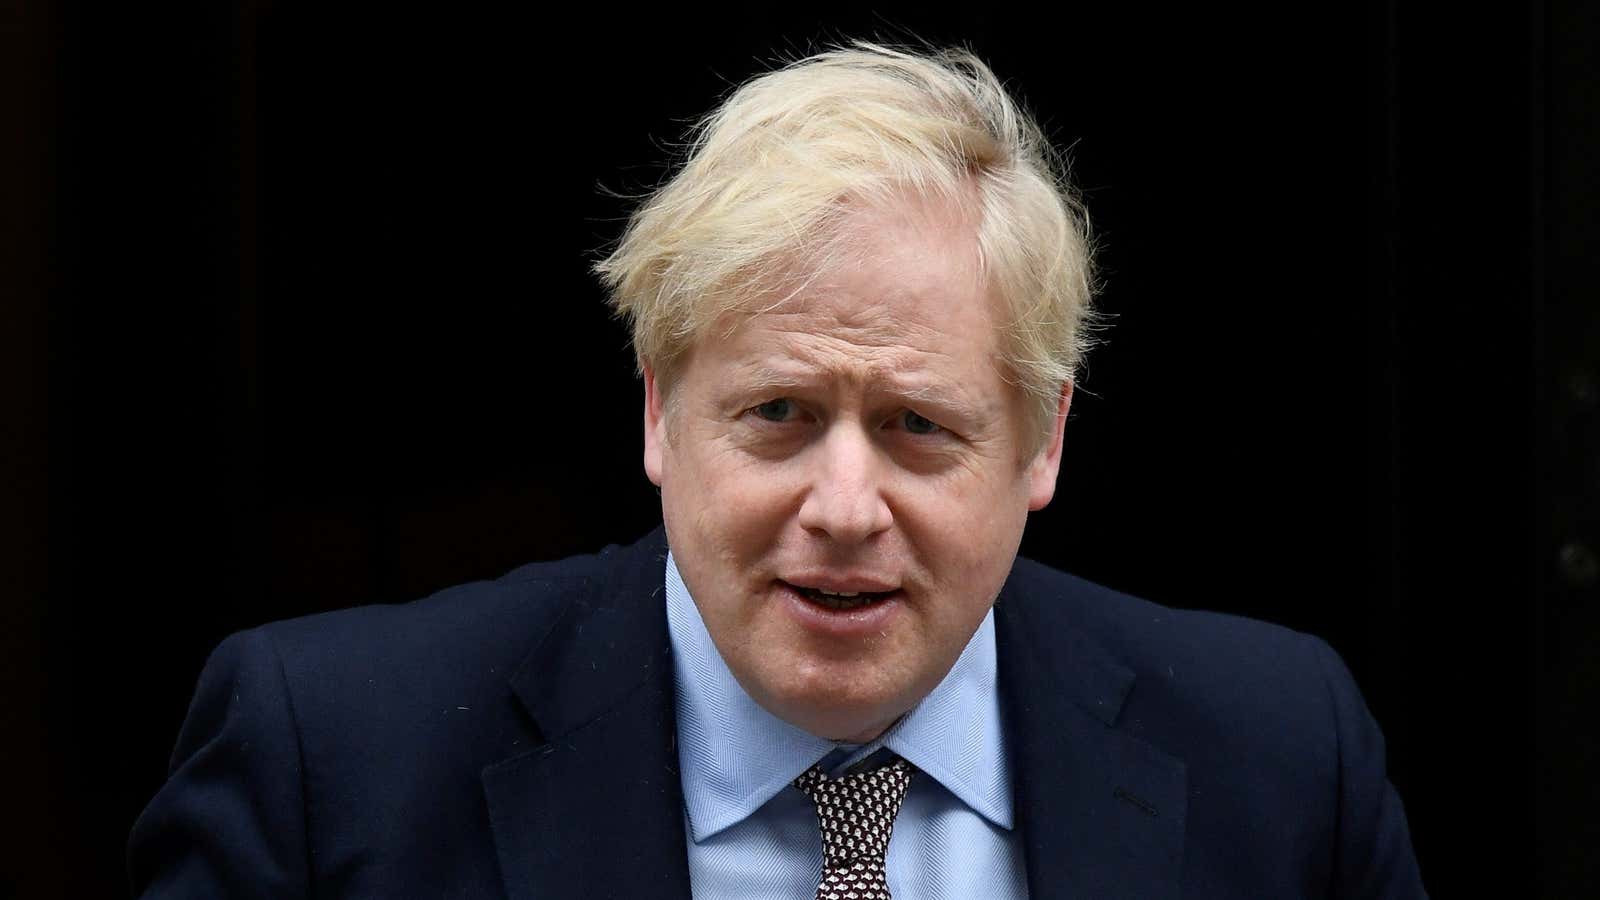 British prime minister Boris Johnson leaves Downing Street in London, on March 4, 2020.